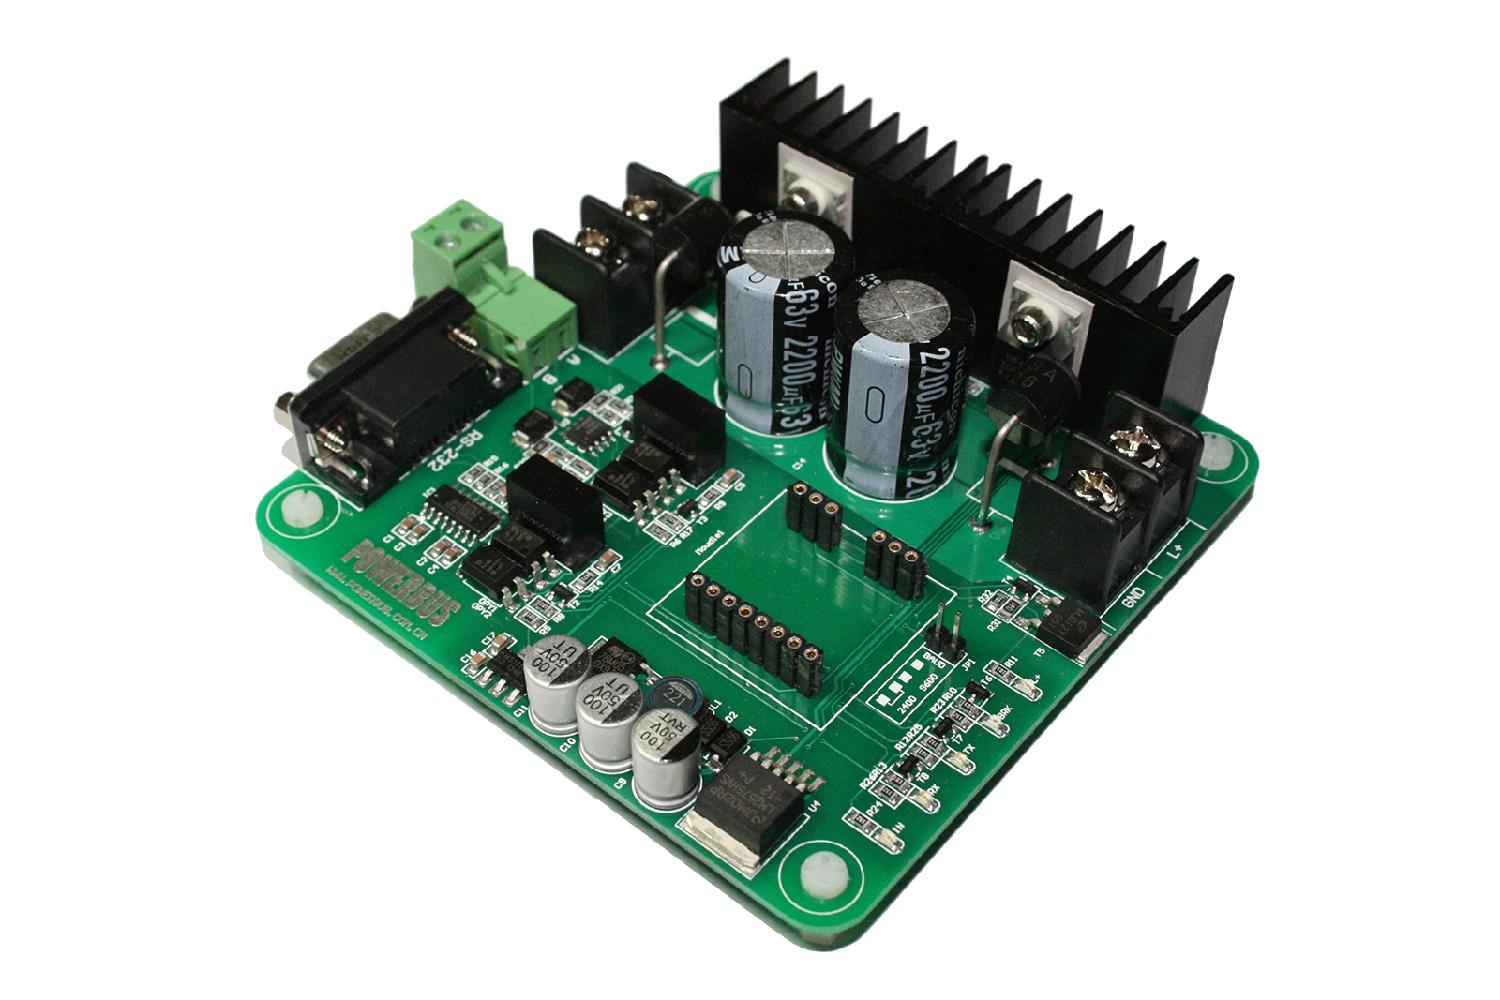 Evaluation board Pb721 HP extended evaluation board